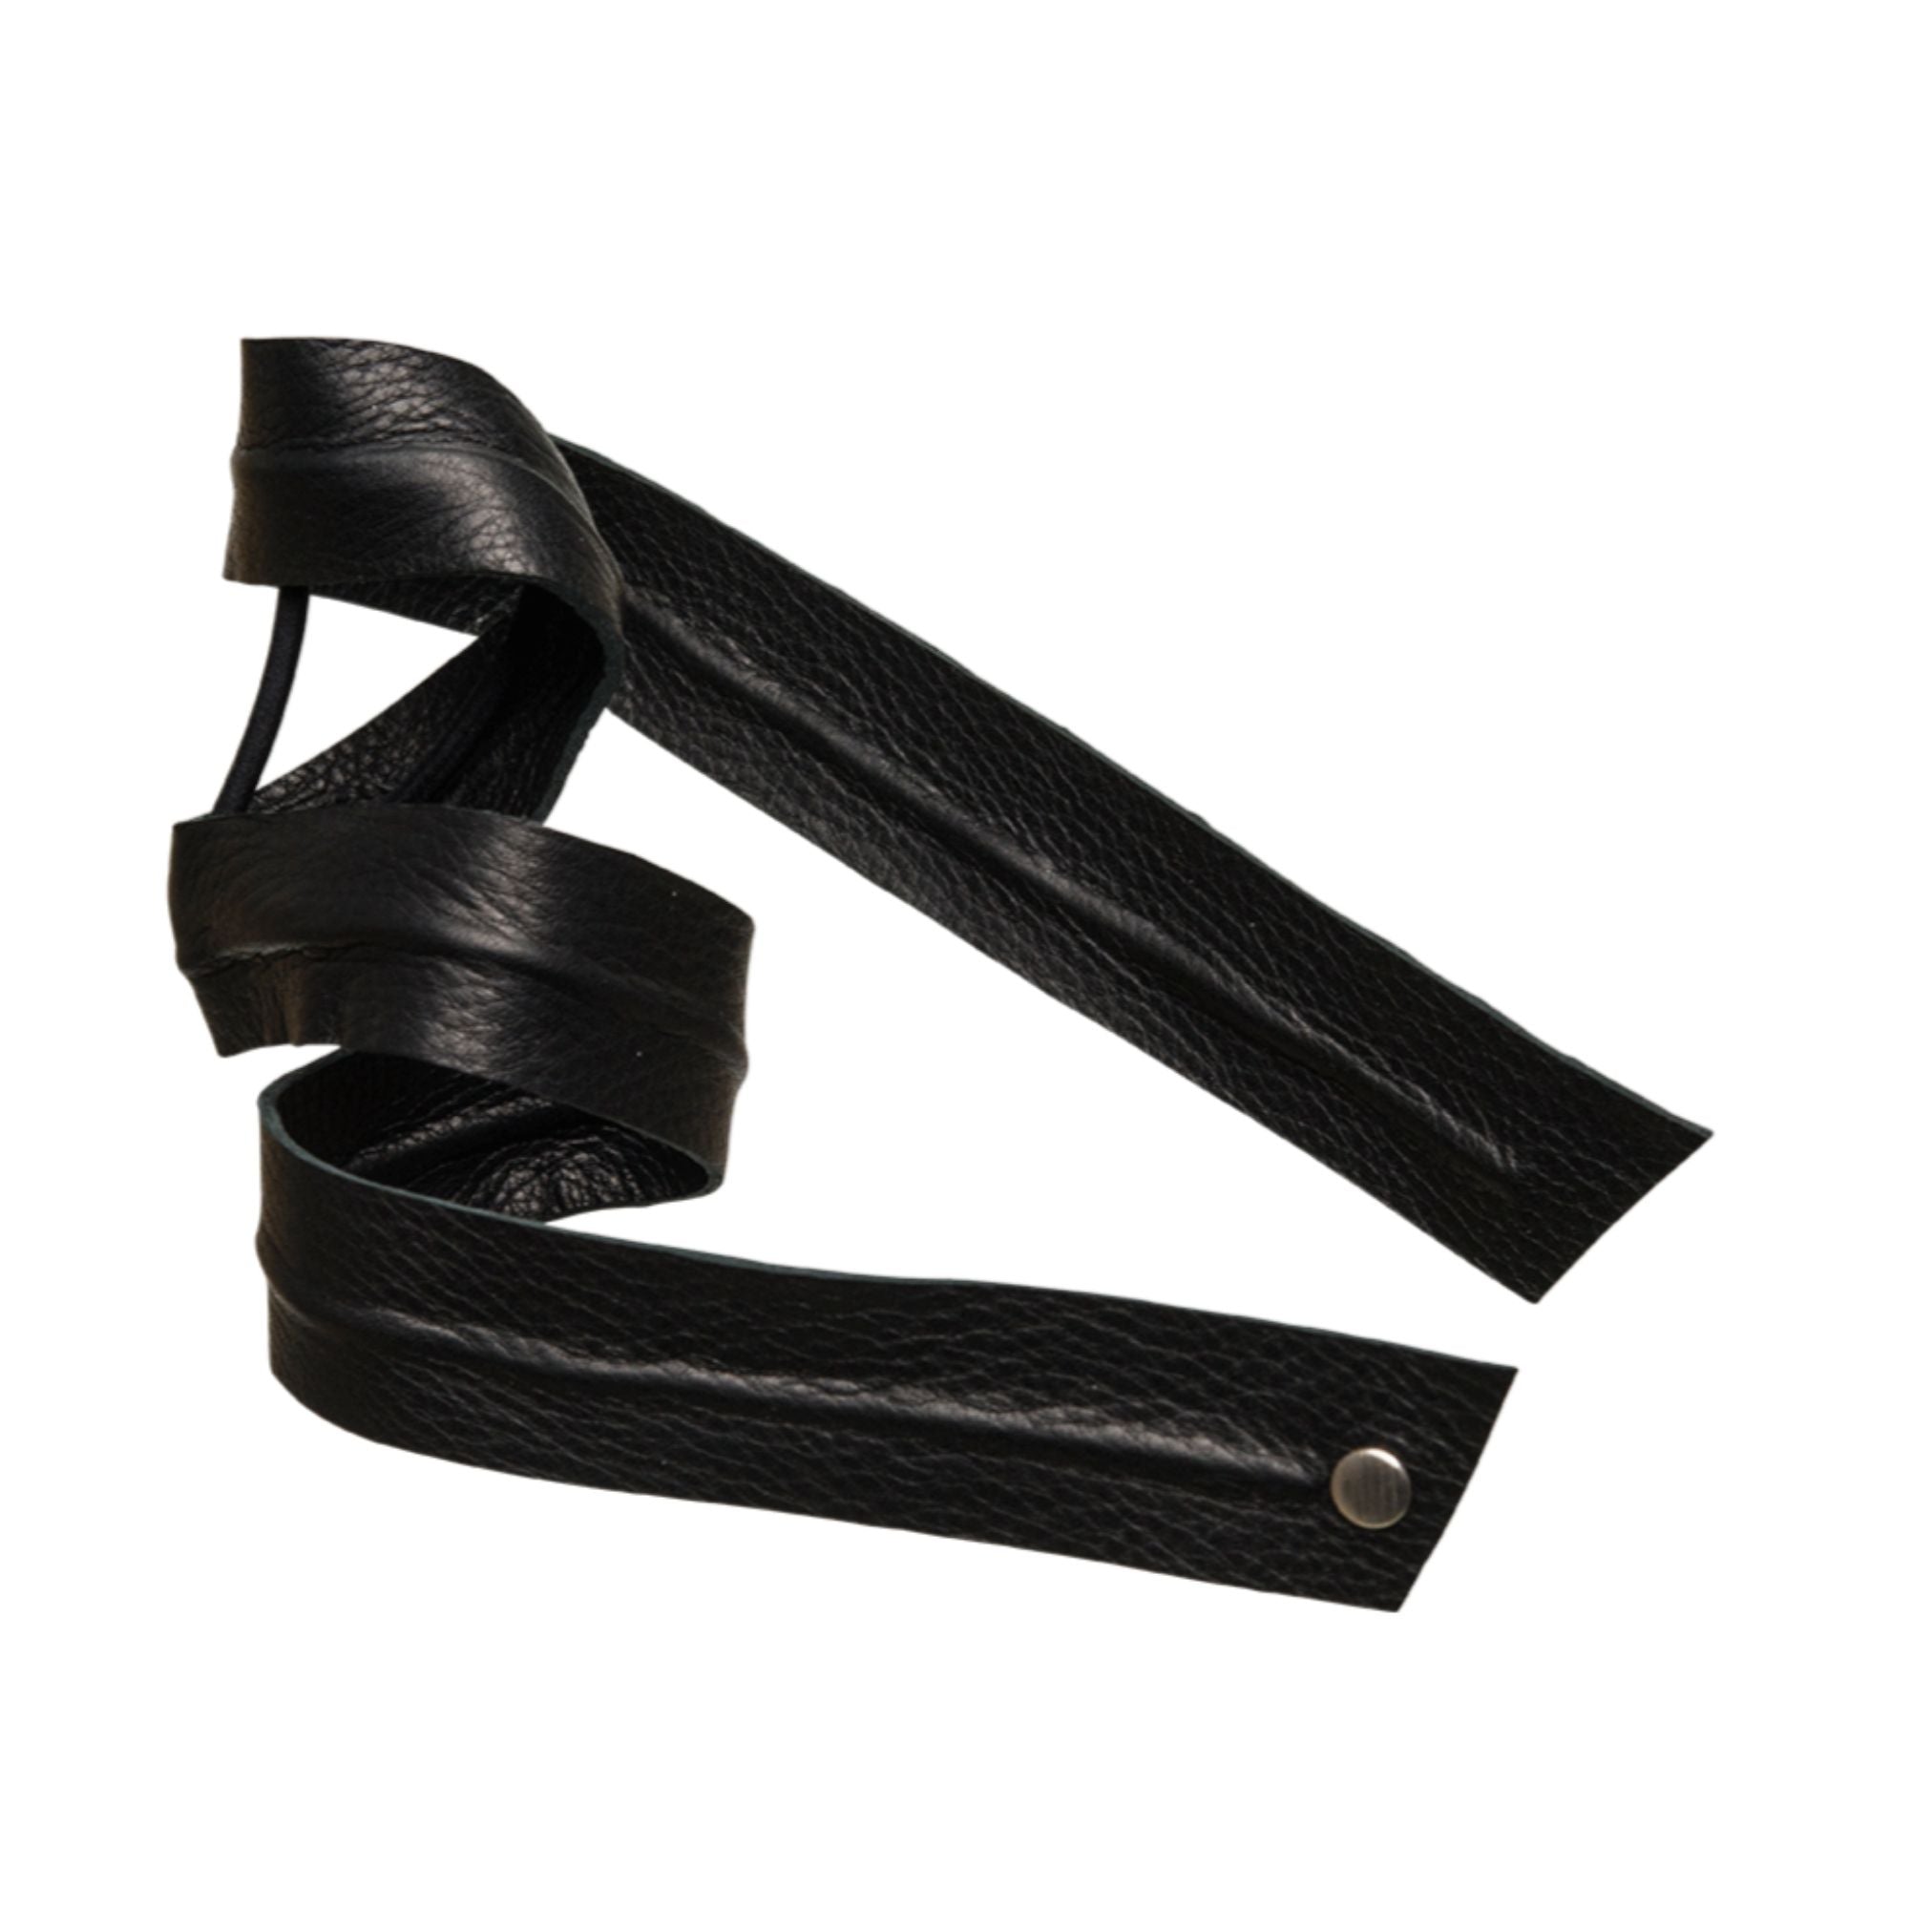 CORINNE Leather Band Long Bendable Black